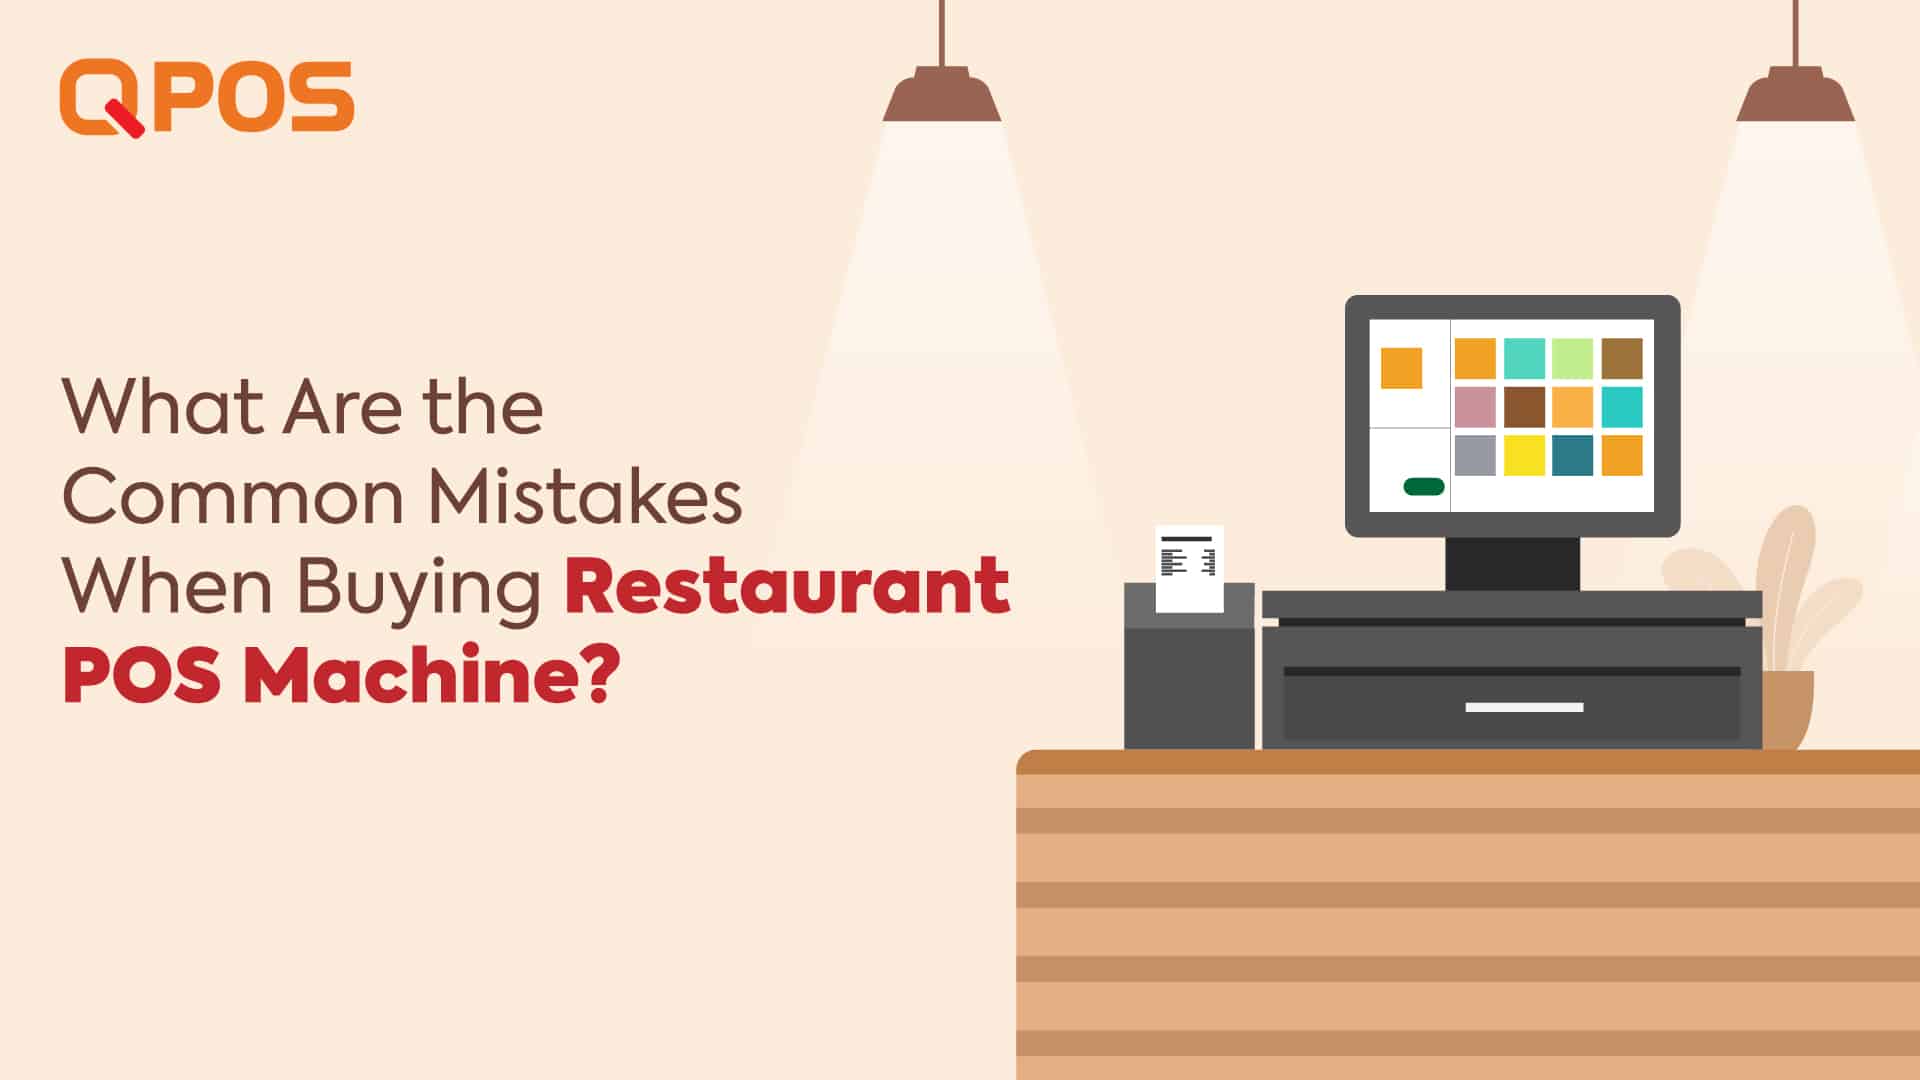 QPOS - What Are the Common Mistakes When Buying Restaurant POS Machine